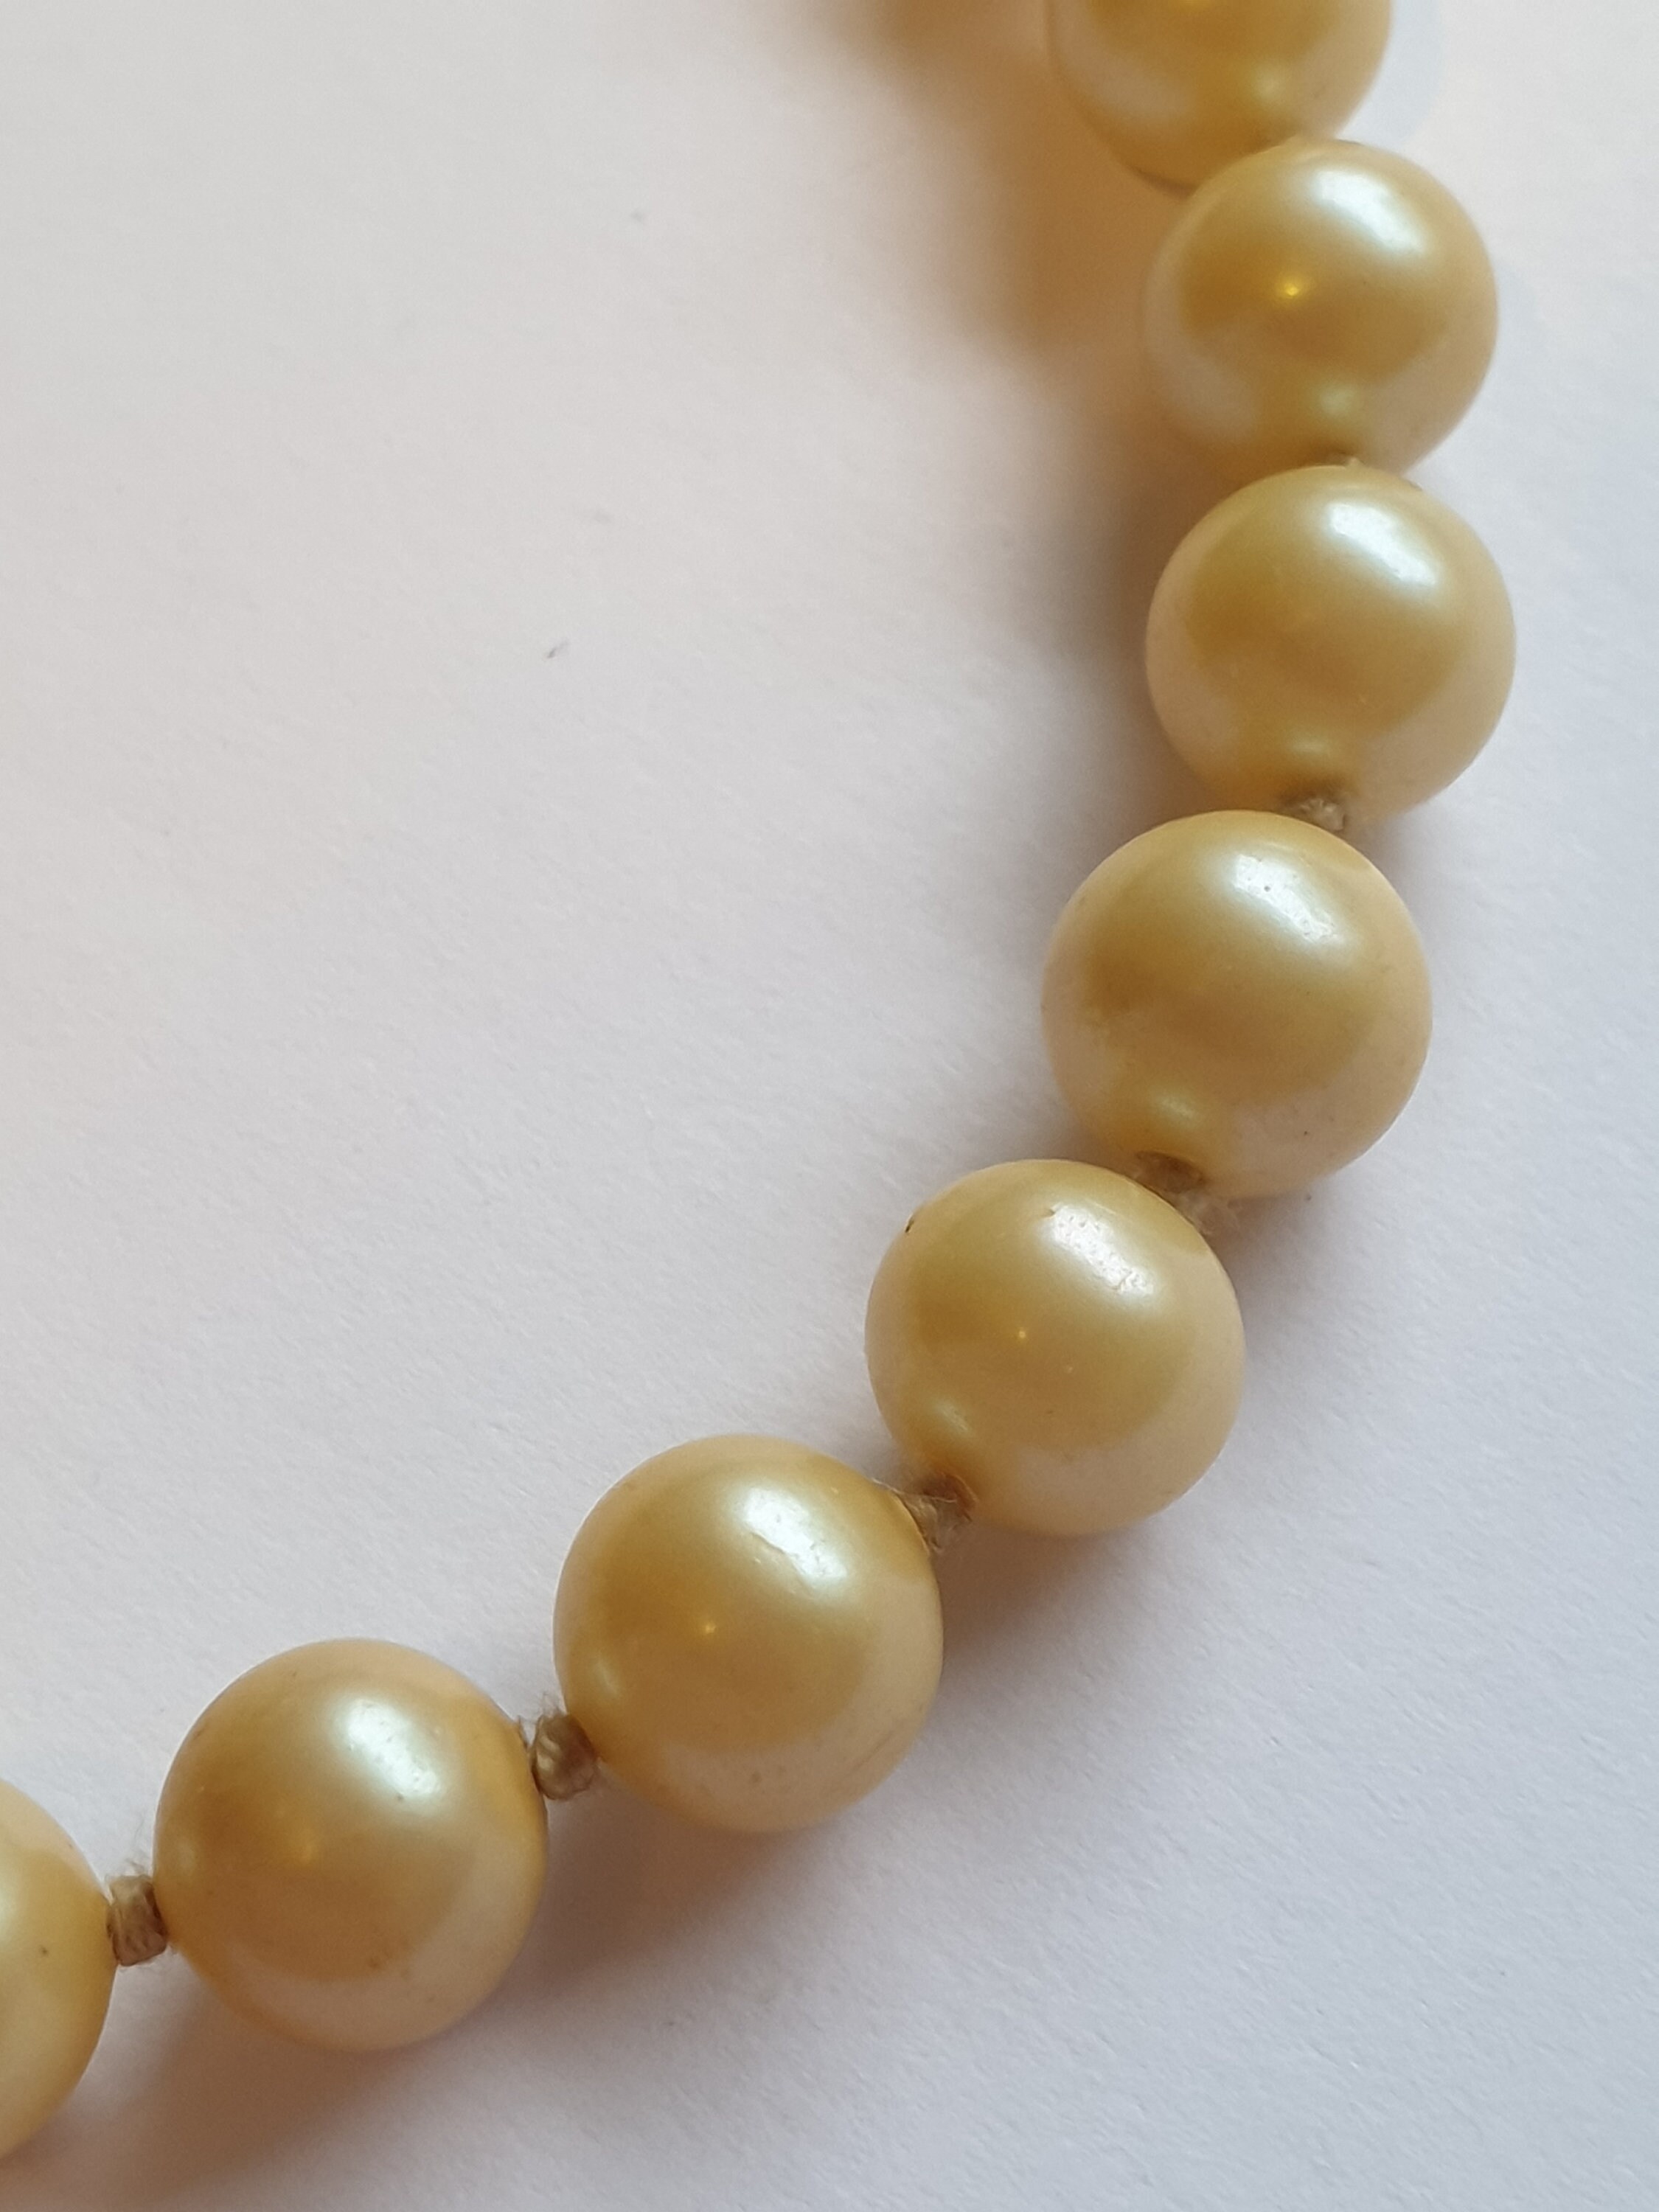 Vintage Cream Faux Pearl Hand Knotted Necklace with Gold Tone… – Second  Wind Vintage